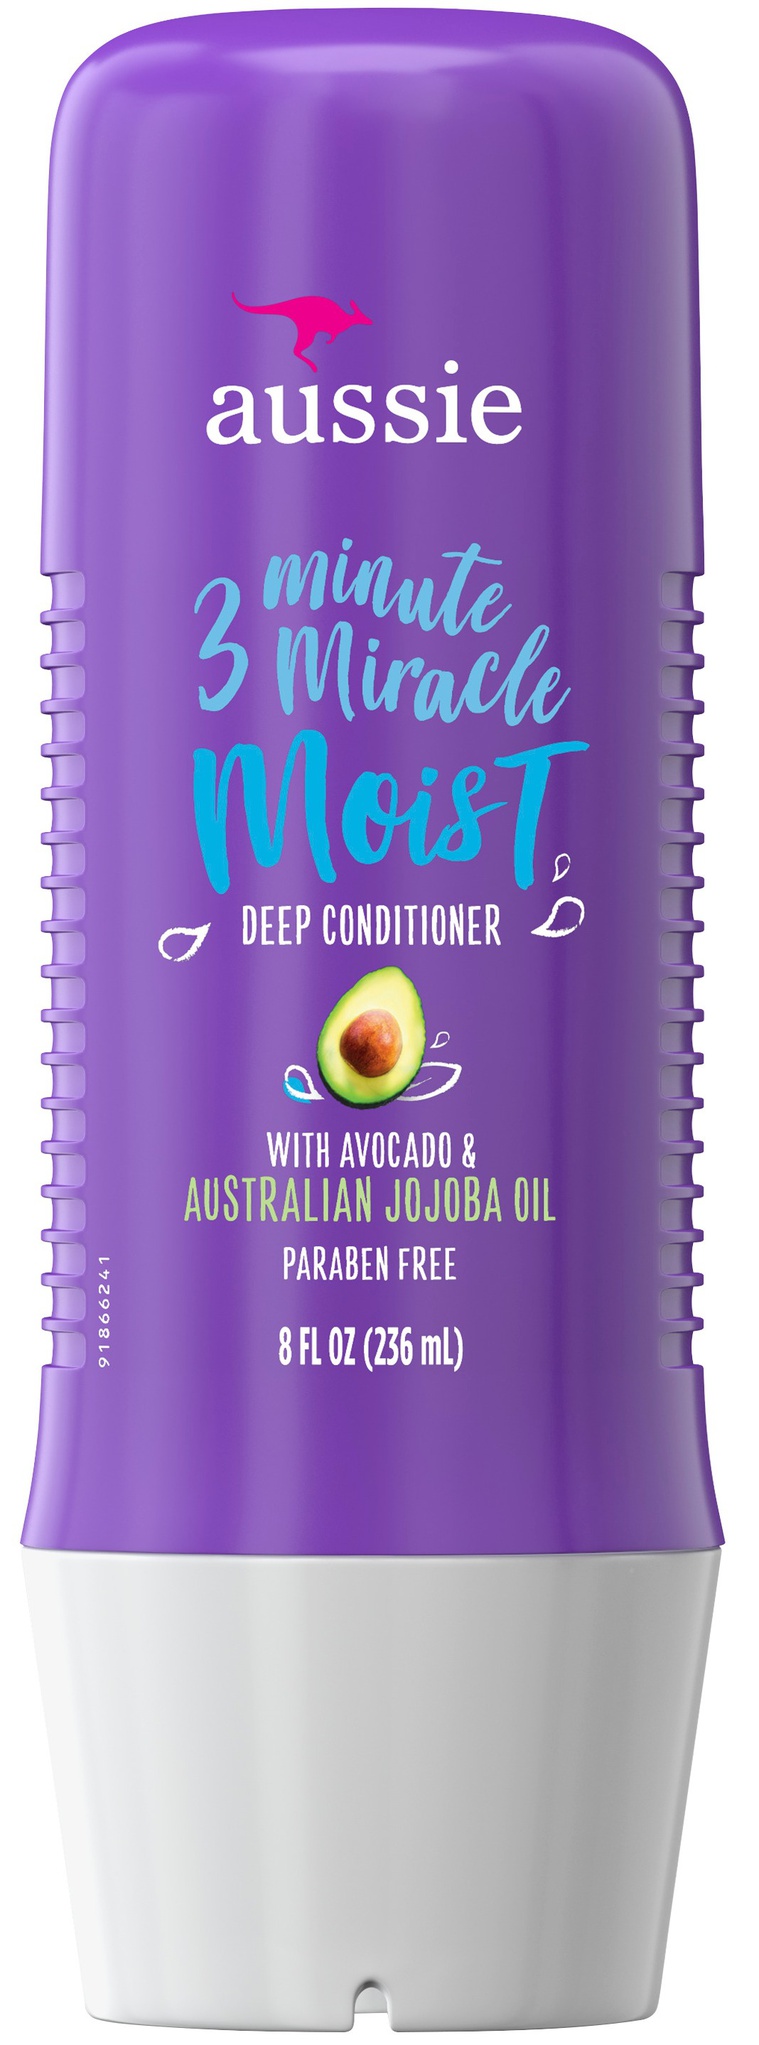 Aussie Miracle Moist 3 Minute Miracle With Avocado